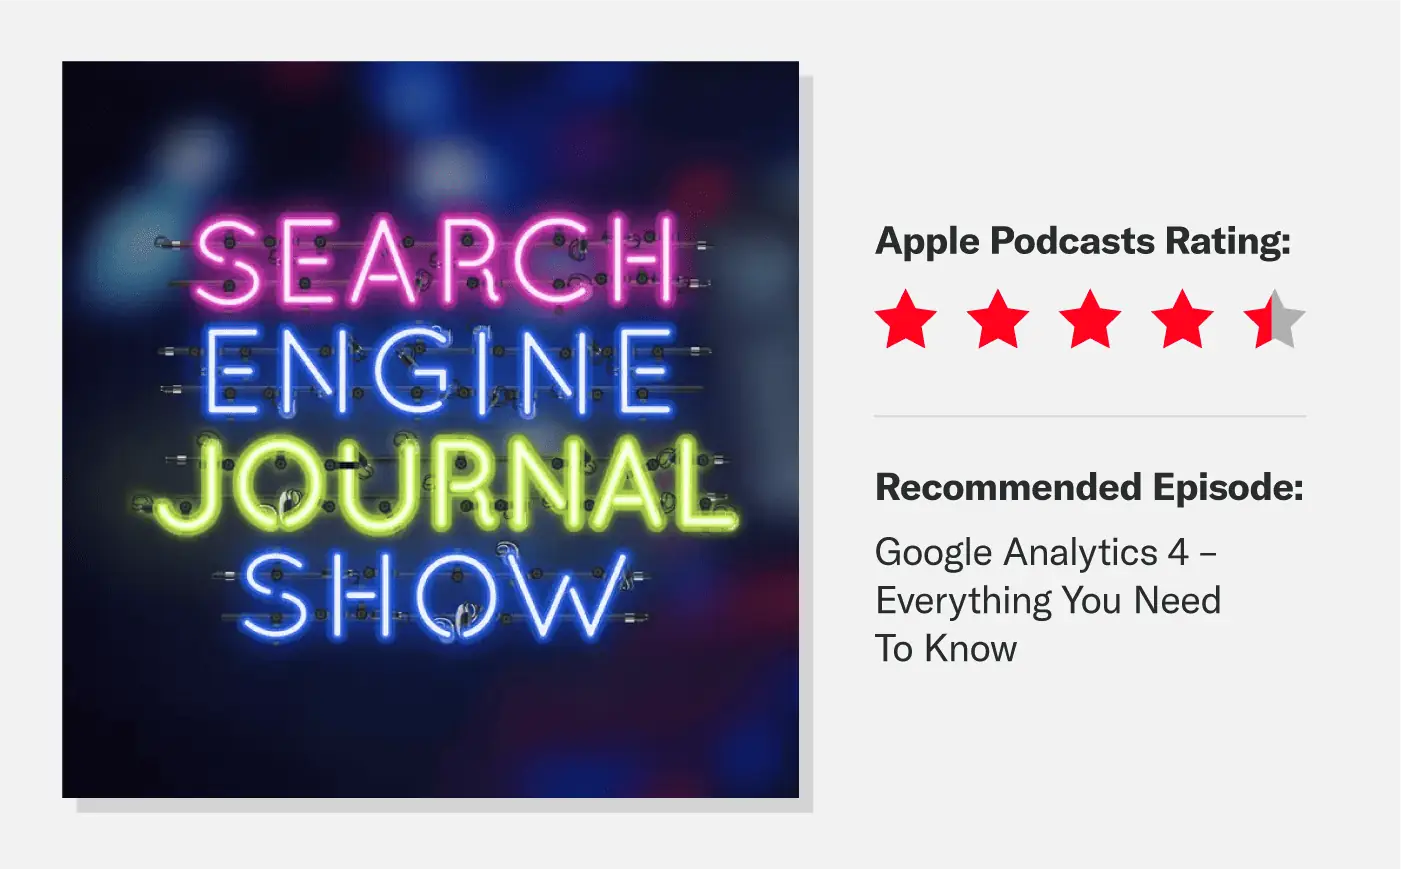 search-engine-journal-show-podcast